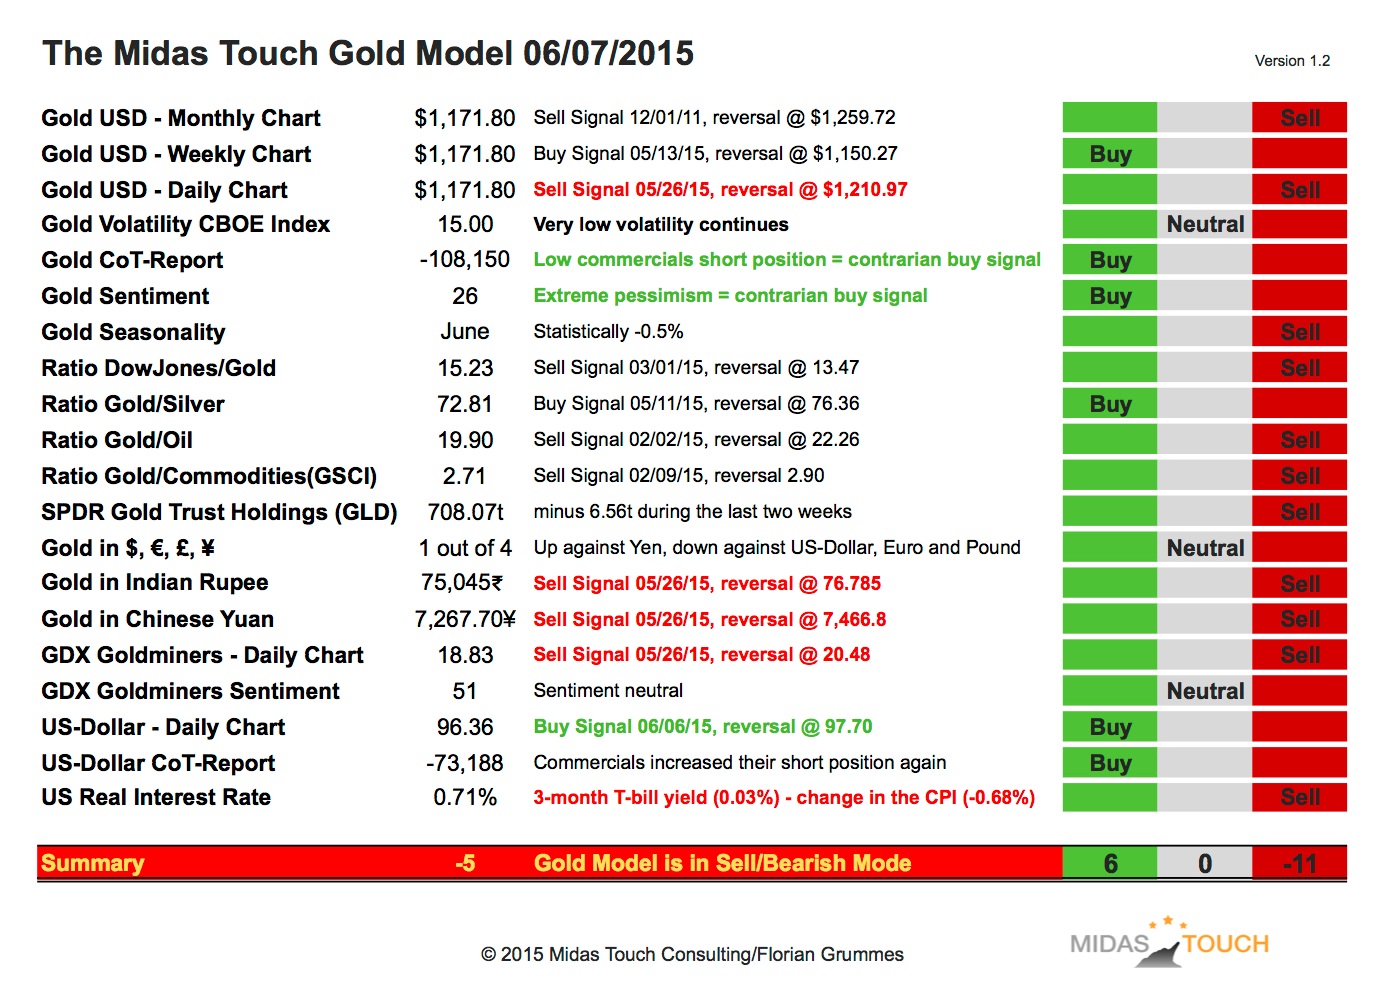 Midas touch gold model